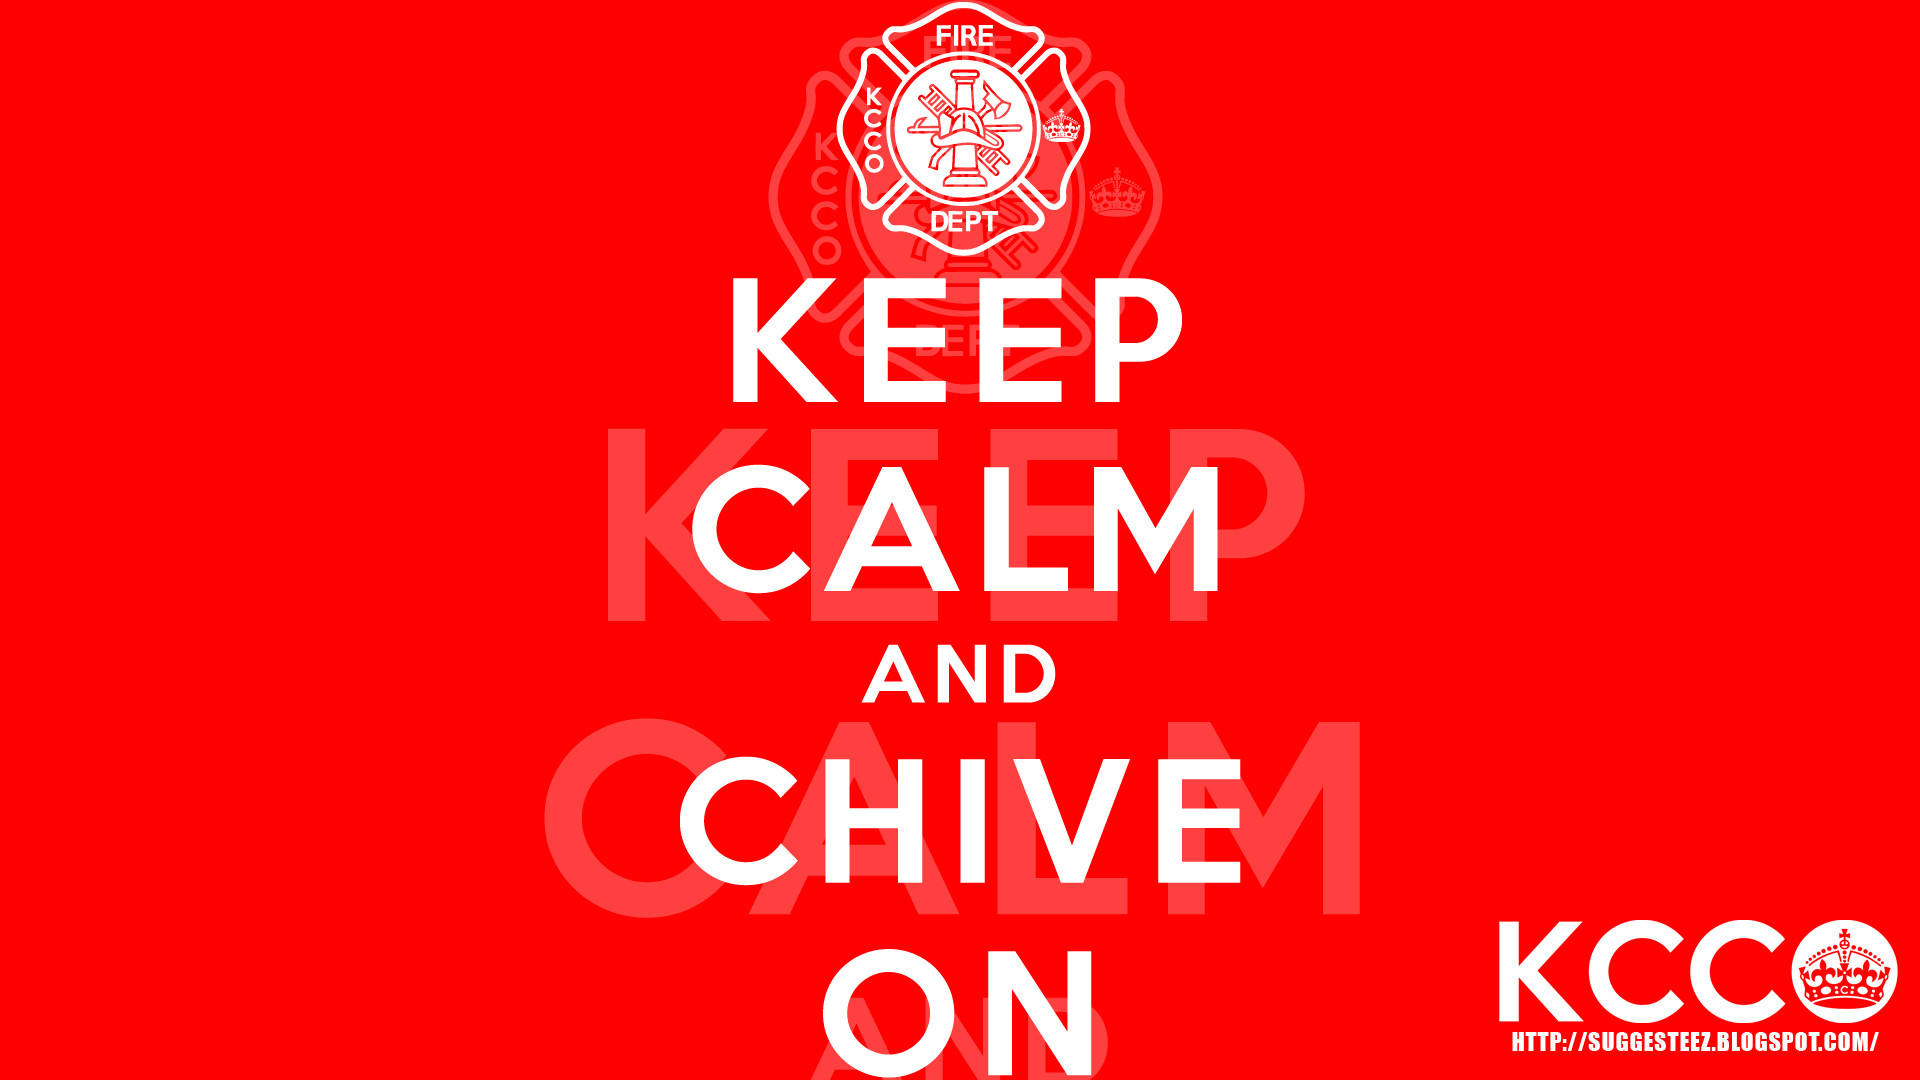 1920x1080 ... theCHIVE HD Firefighter KCCO Red Wallpaper by suggesteez